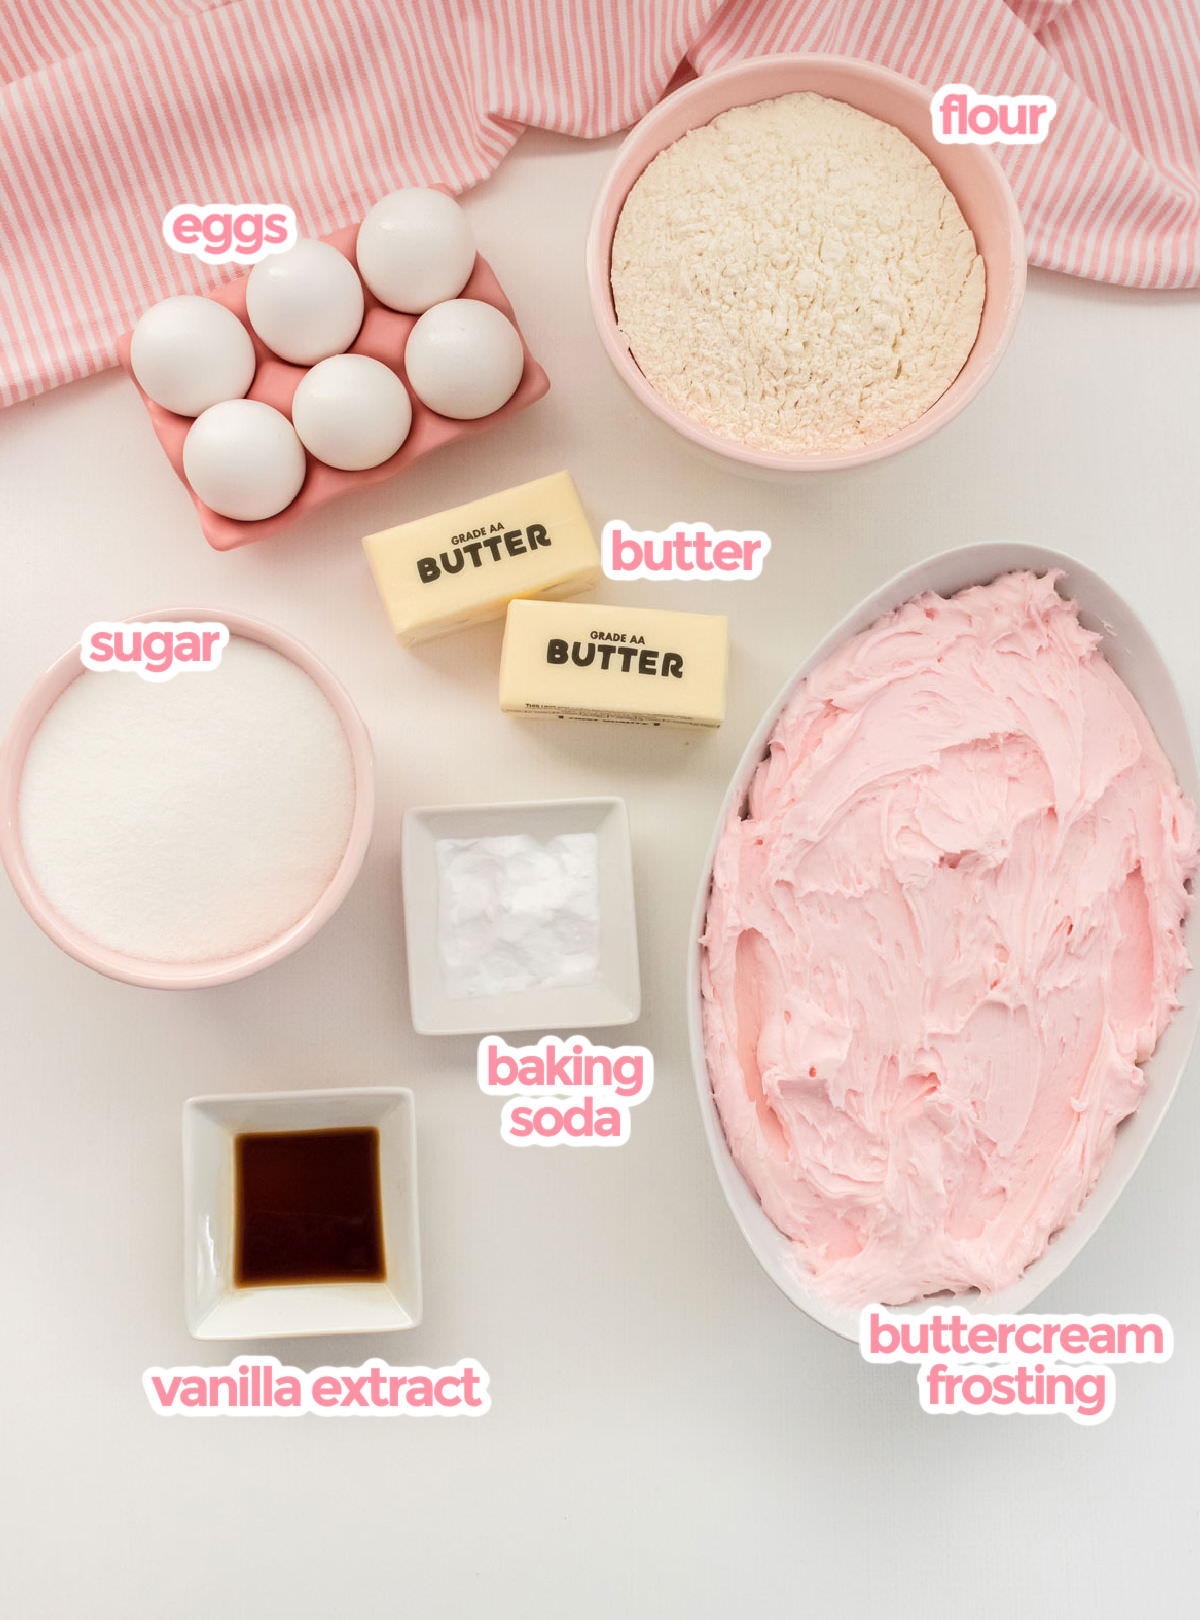 All the ingredients you will need to make Sugar Cooke Bars including flour, eggs, butter, sugar, baking soda, vanilla extract and buttercream frosting.